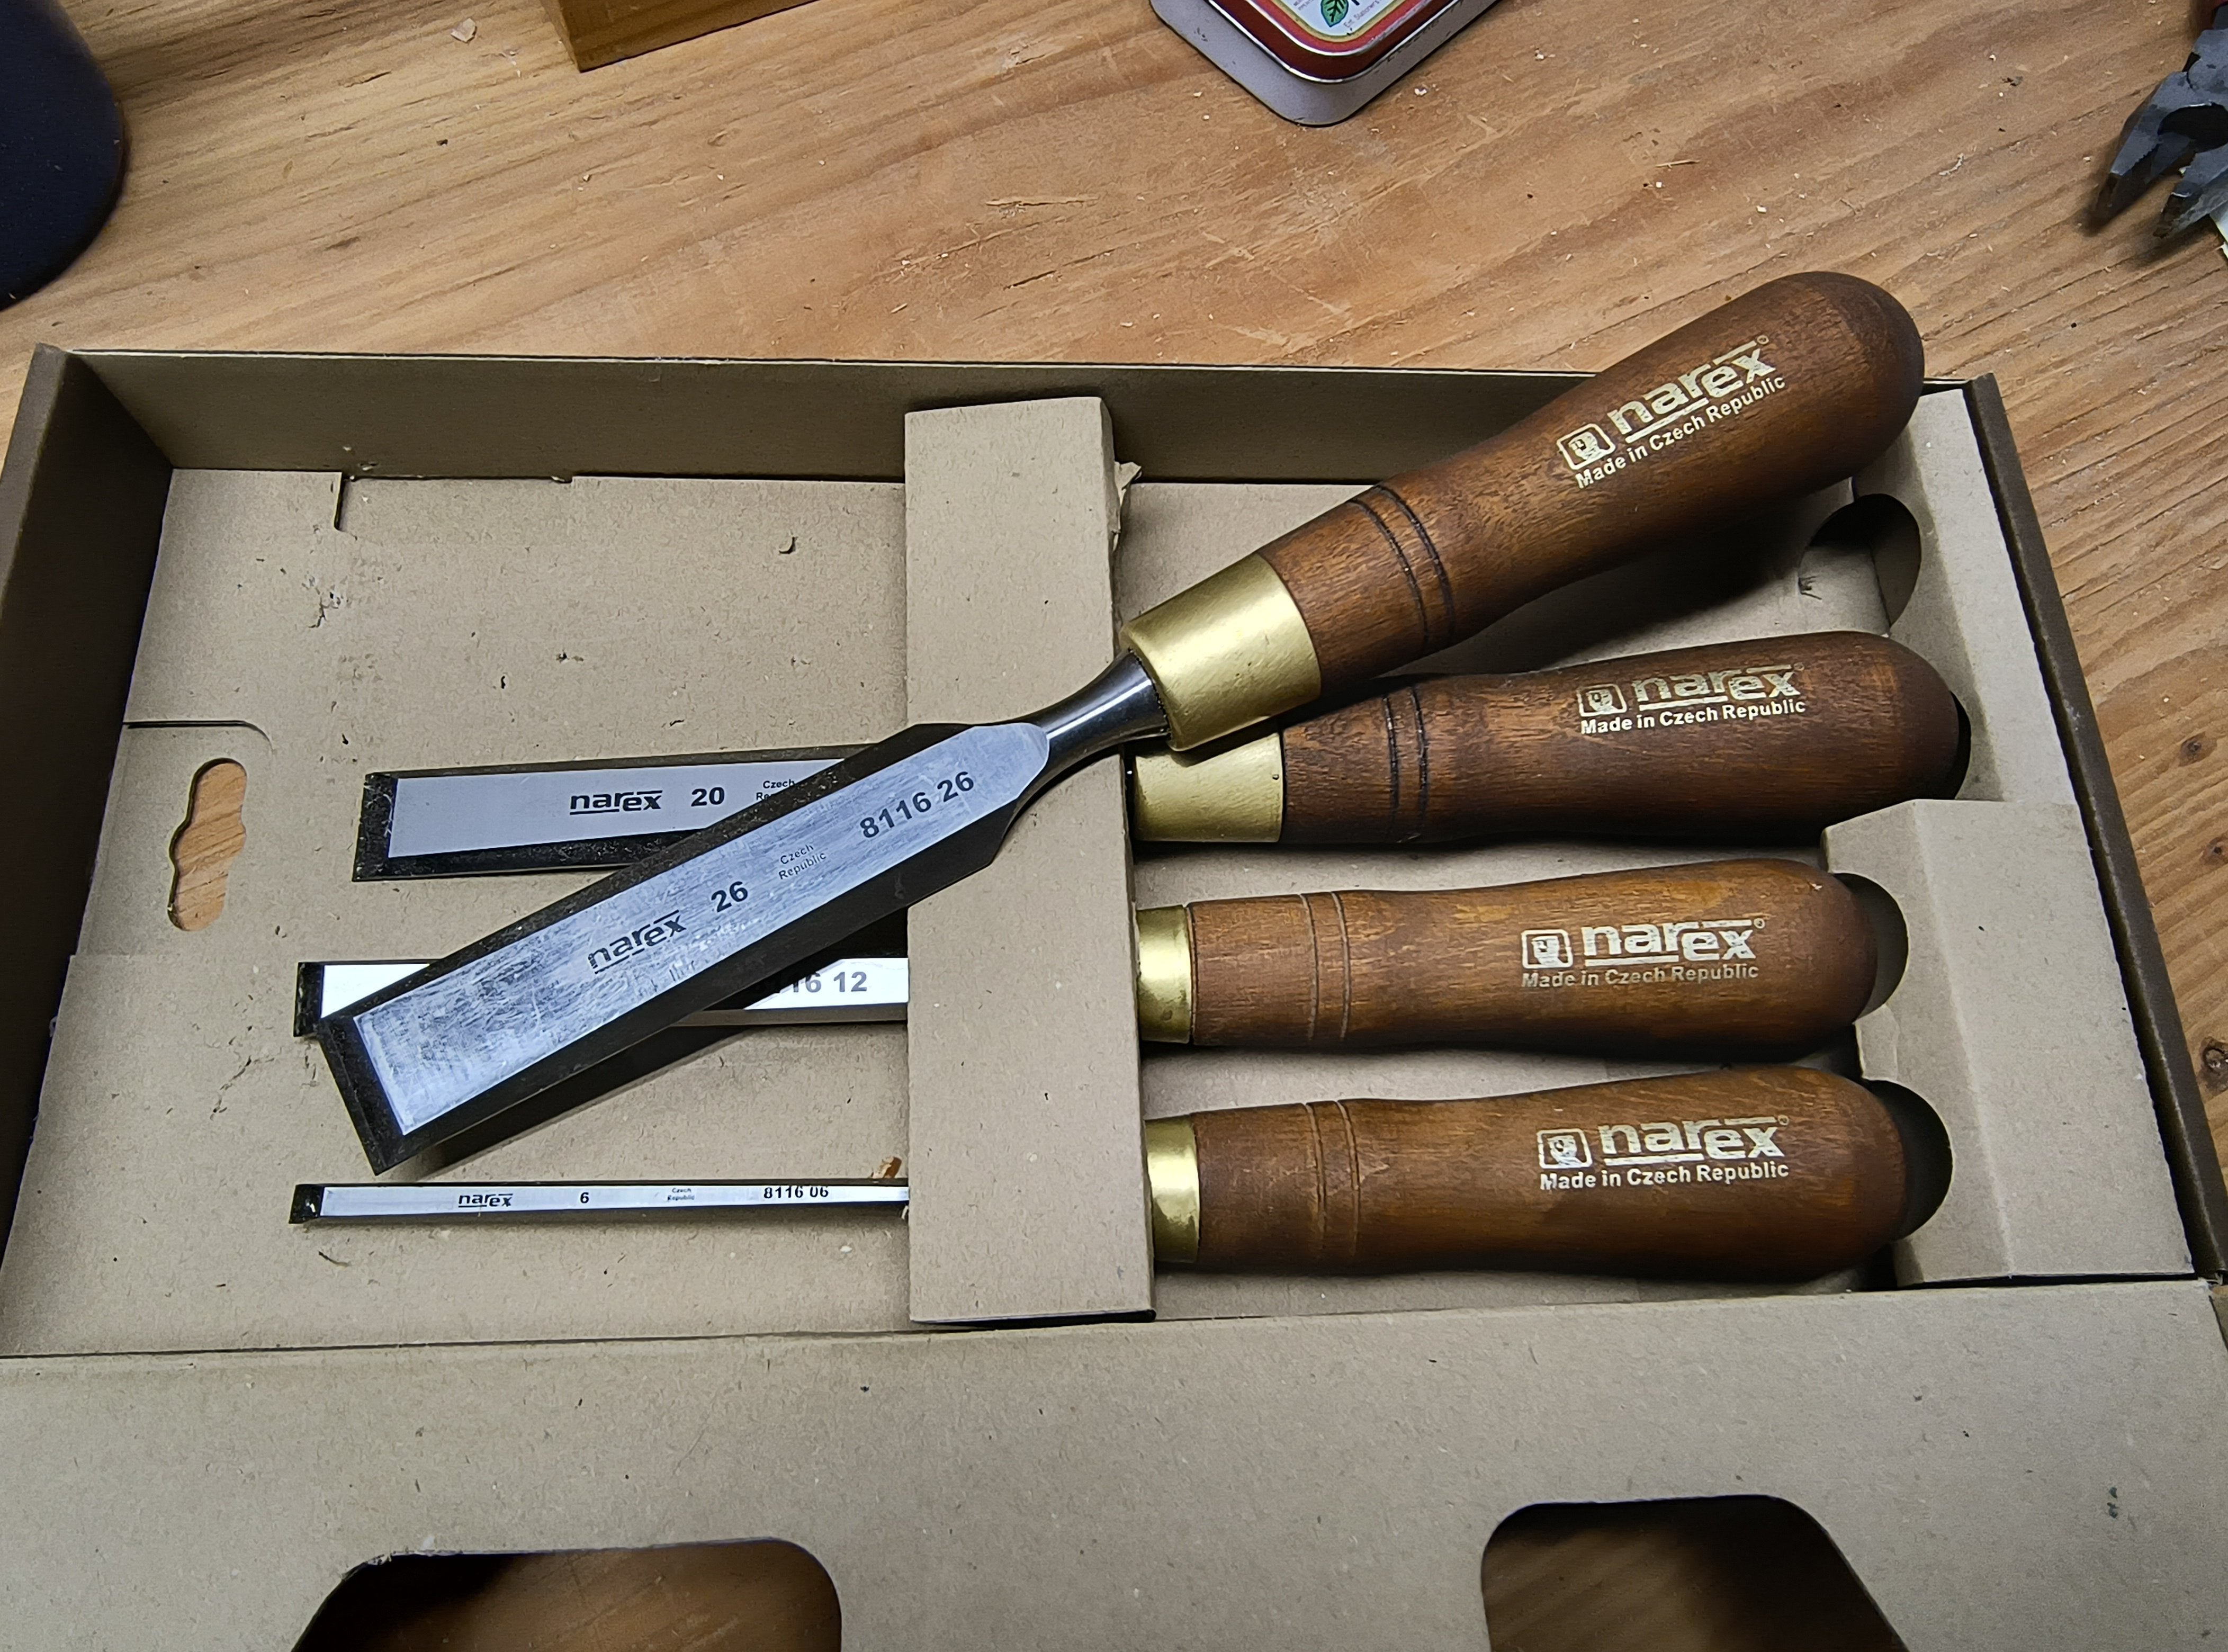 Narex Premium chisels a great value